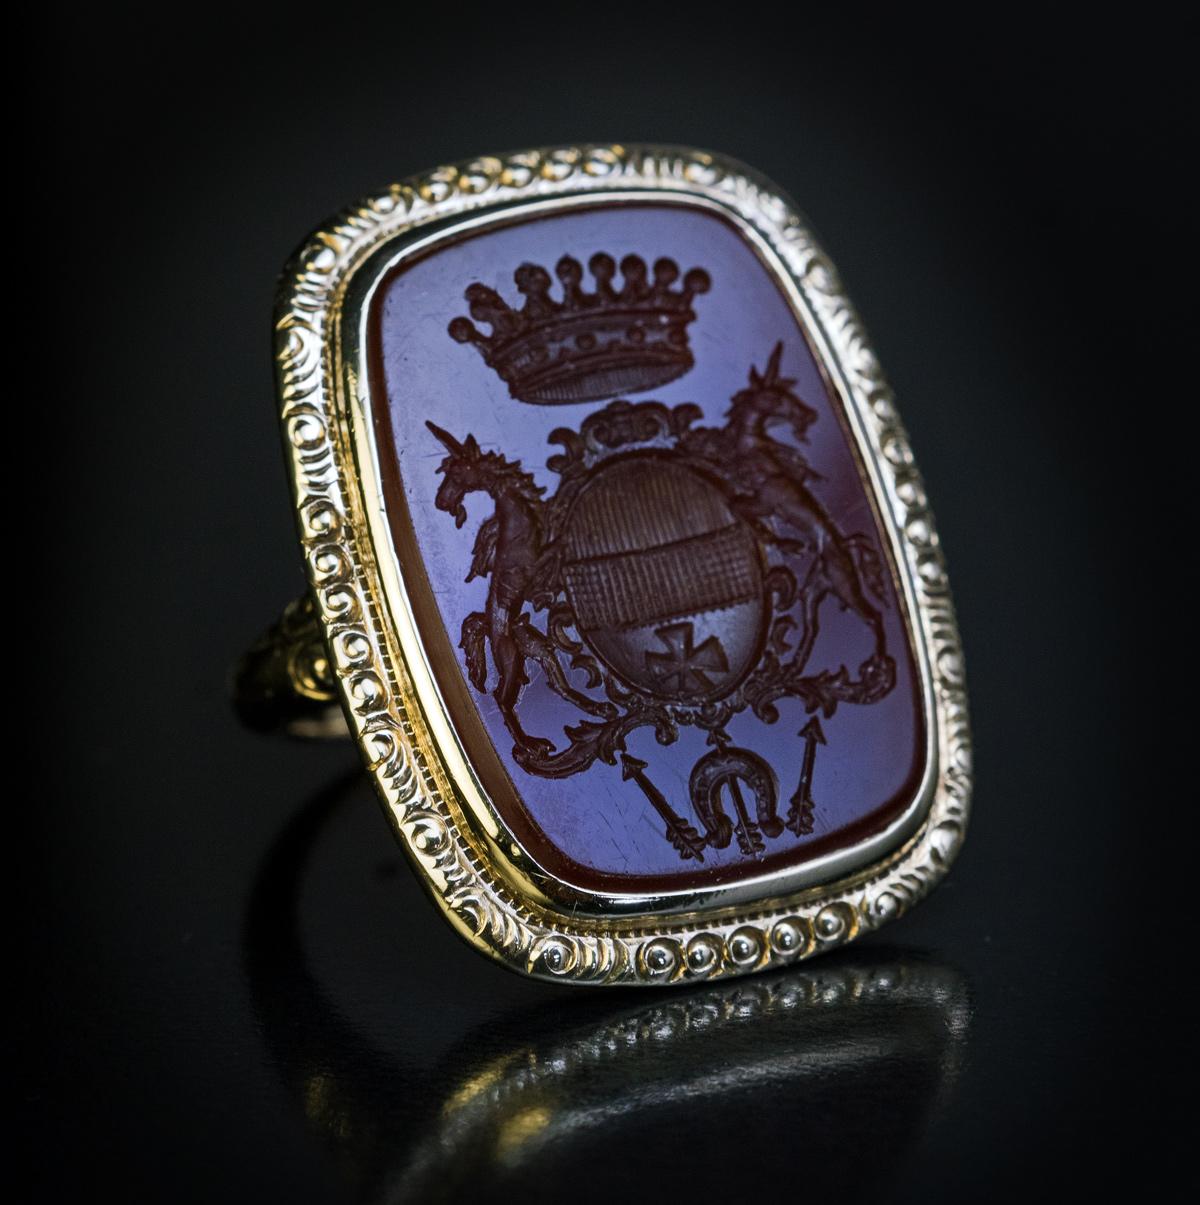 Circa 1880

A Victorian era antique 14K gold signet ring is set with a large chocolate brown carnelian seal matrix finely engraved with a coat of arms of a Count or a Baron. The armorial is designed as a crowned shield with a cross held by two